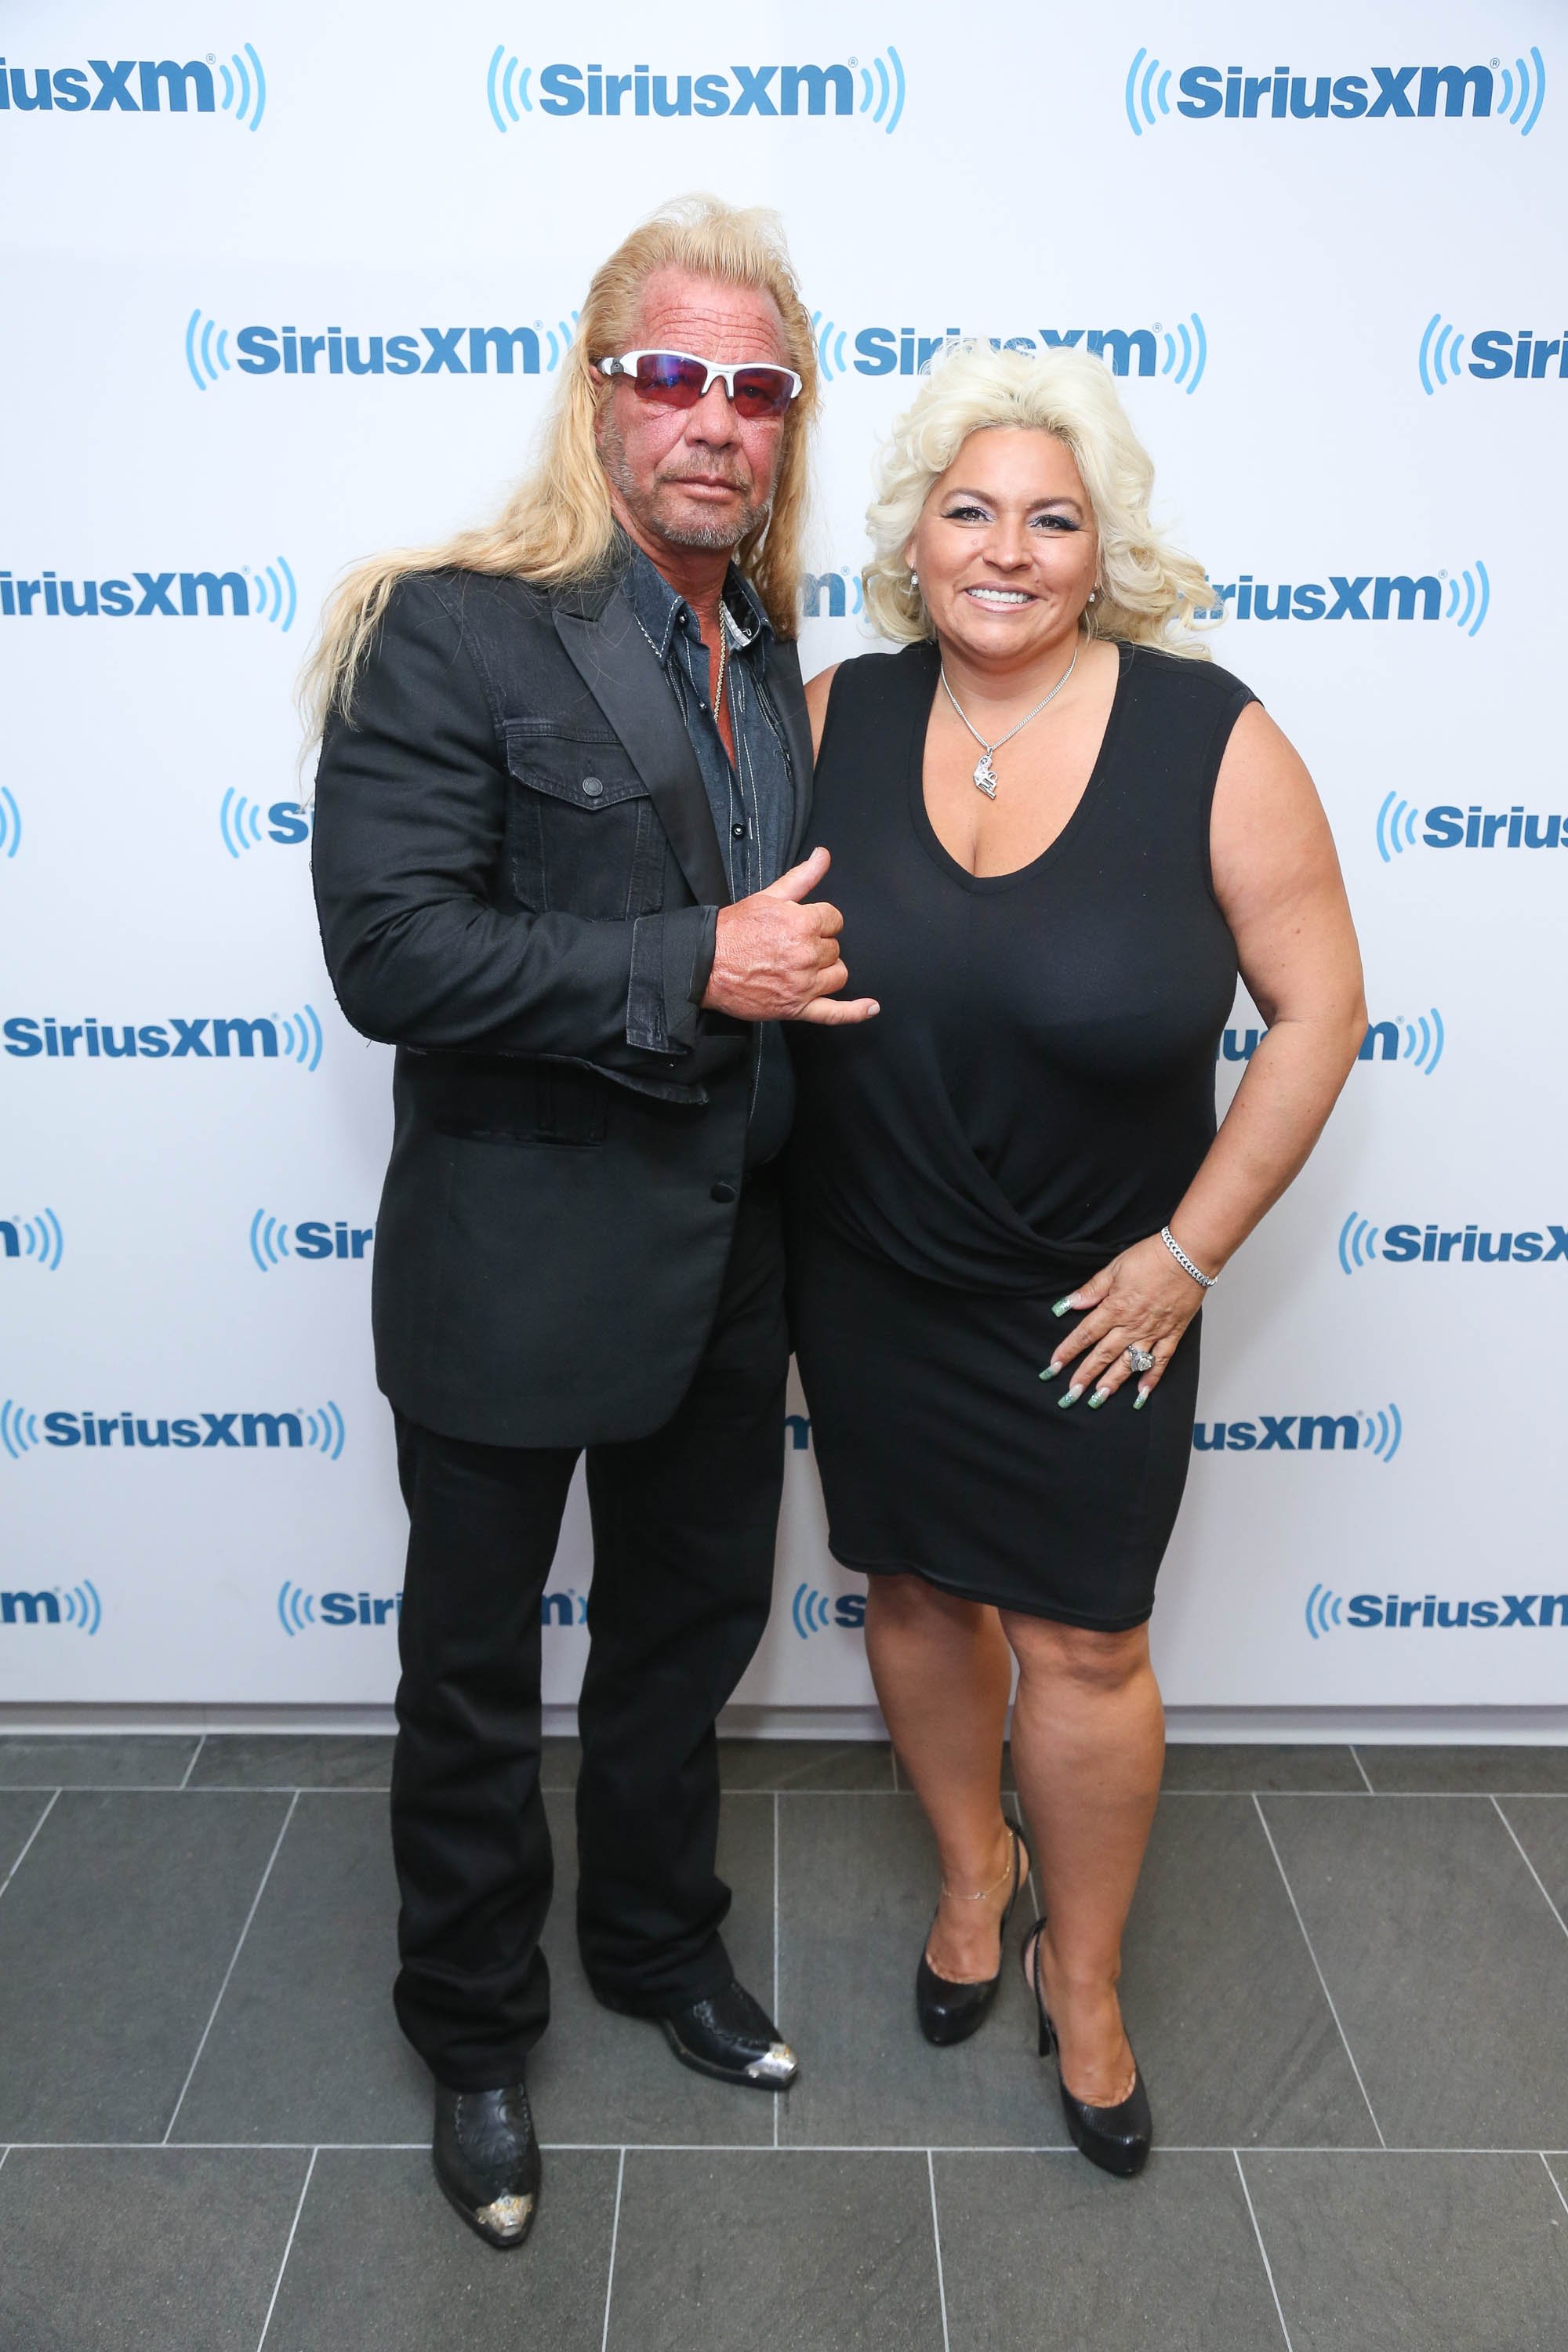 Duane and Beth Chapman visit the SiriusXM Studios in New York City on June 9, 2014 | Photo: Getty Images